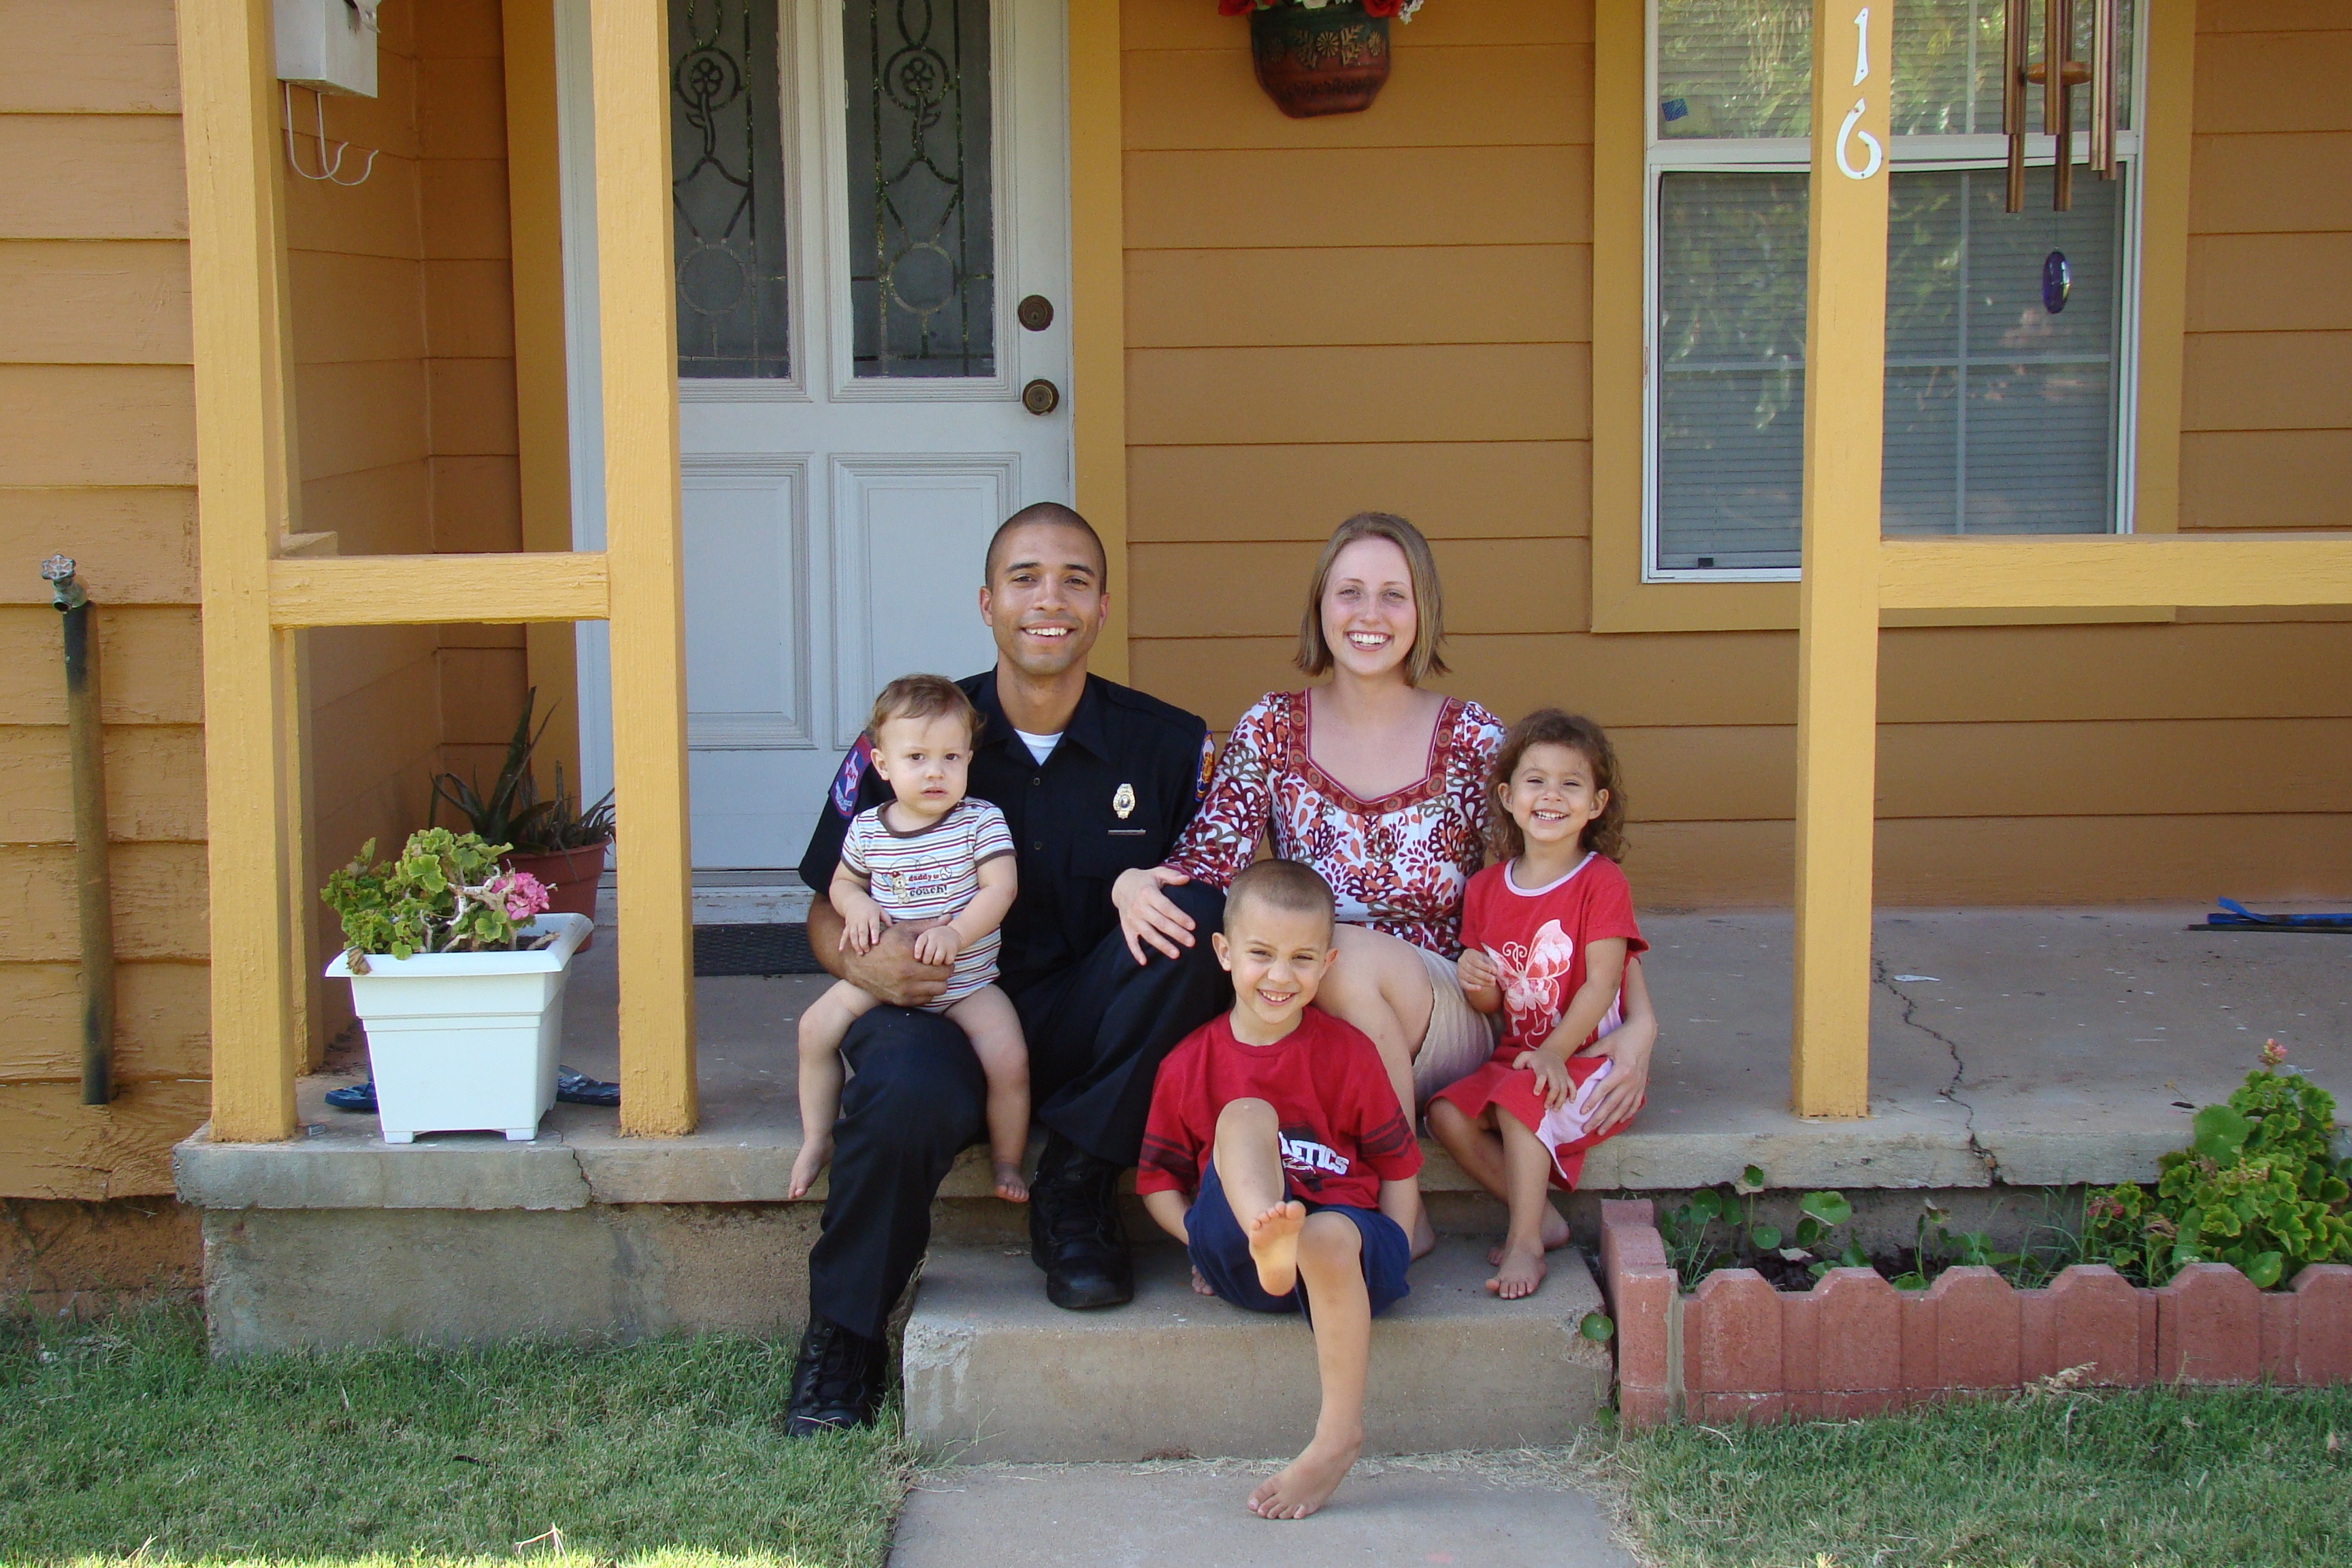 A photograph of a family of five, including two preschoolers and one toddler, sitting on the front porch step of their home.